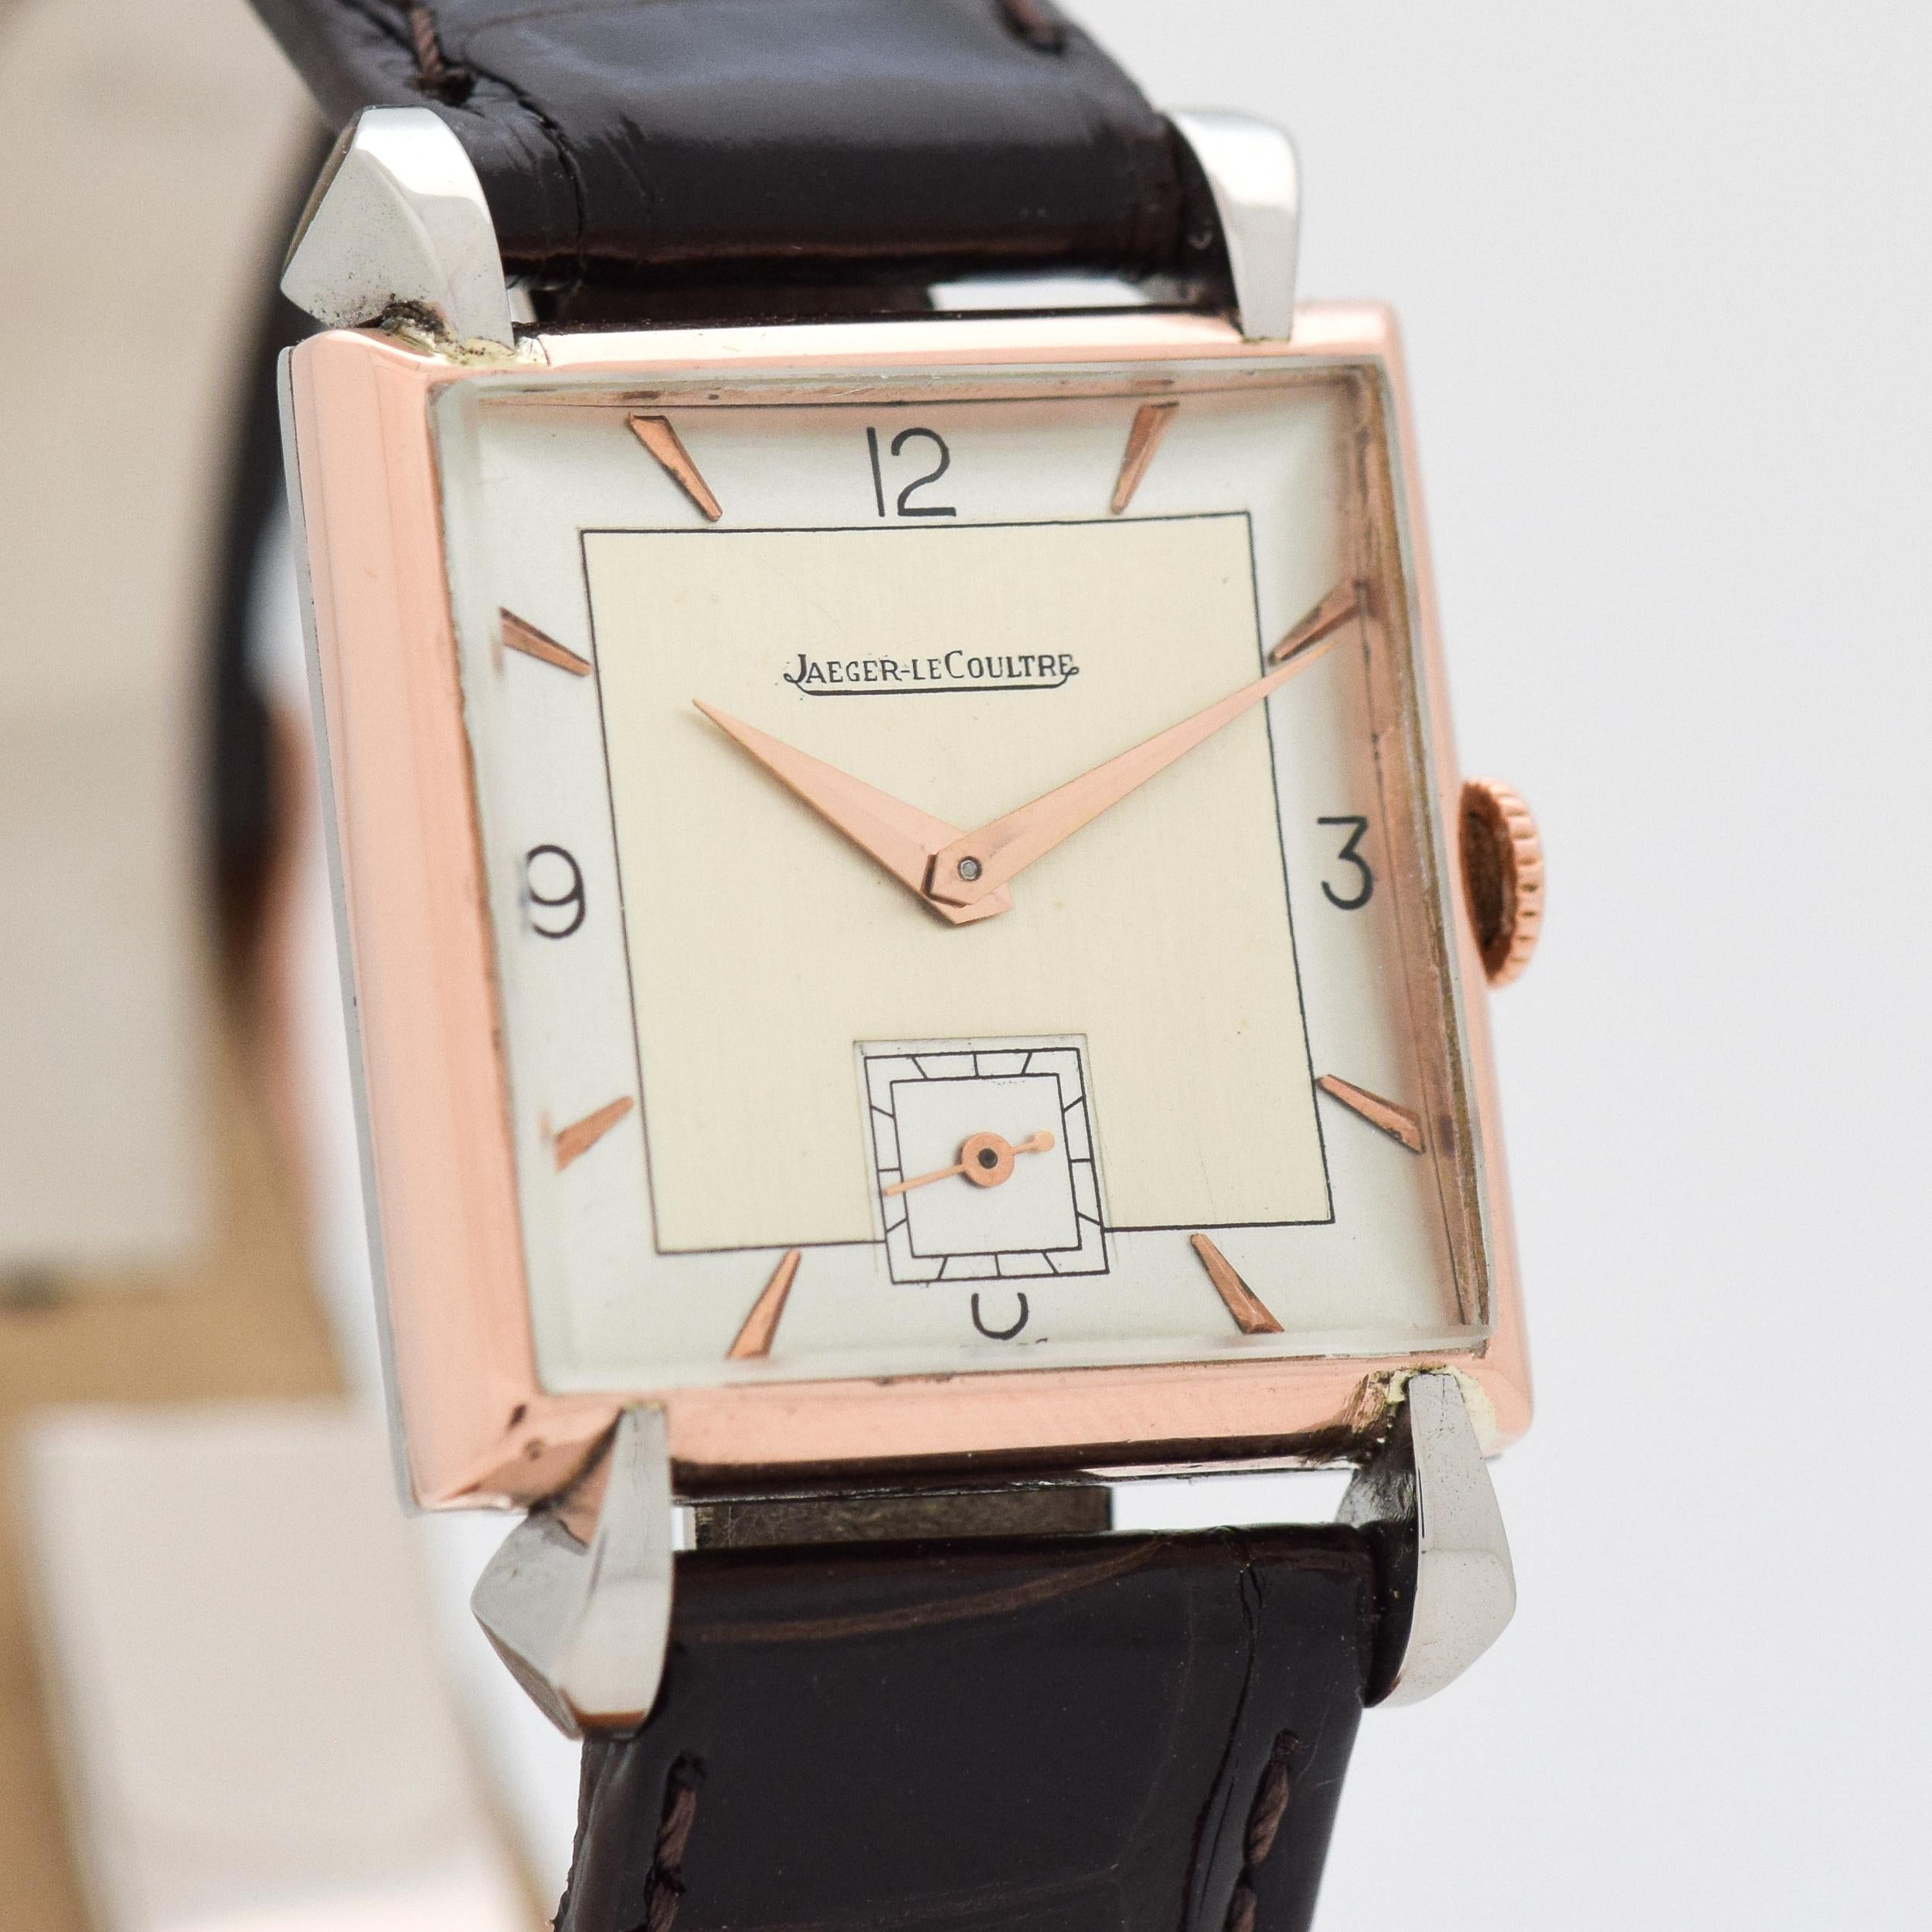 1940's Vintage Jaeger - Le Coultre 14k Rose Gold with Stainless Steel Case Back with Two Tone Gray and Silver Dial with Applied Rose Color Beveled Elongated Triangle Markers. 24mm x 34mm lug to lug (0.94 in. x 1.34 in.) - 17 jewel, manual caliber